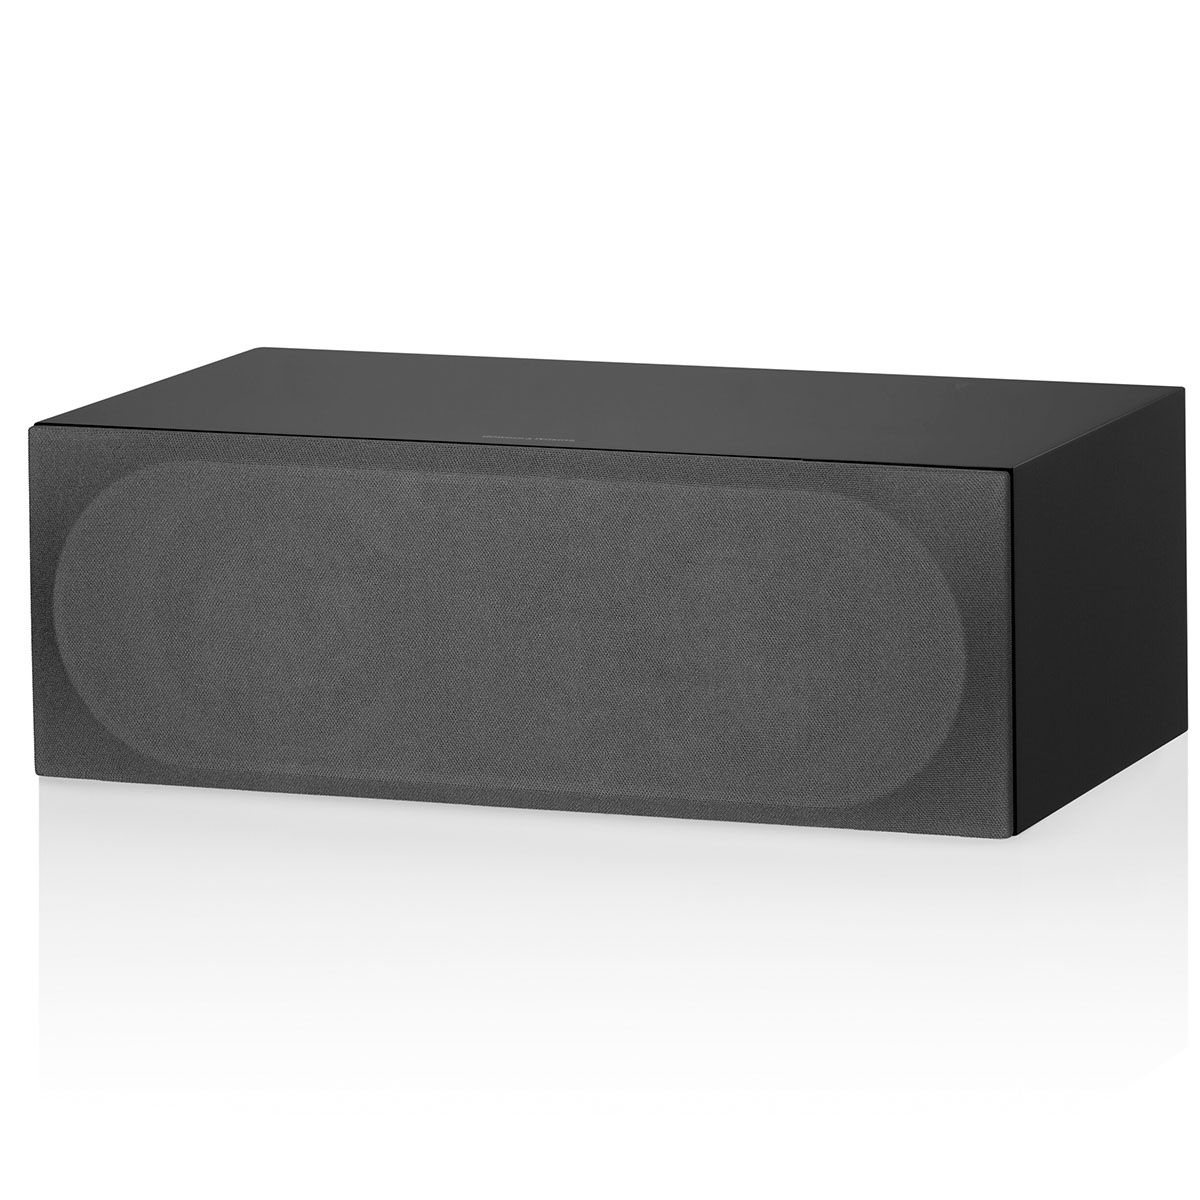 bowers and wilkins htm72 s3 center channel speaker black front view